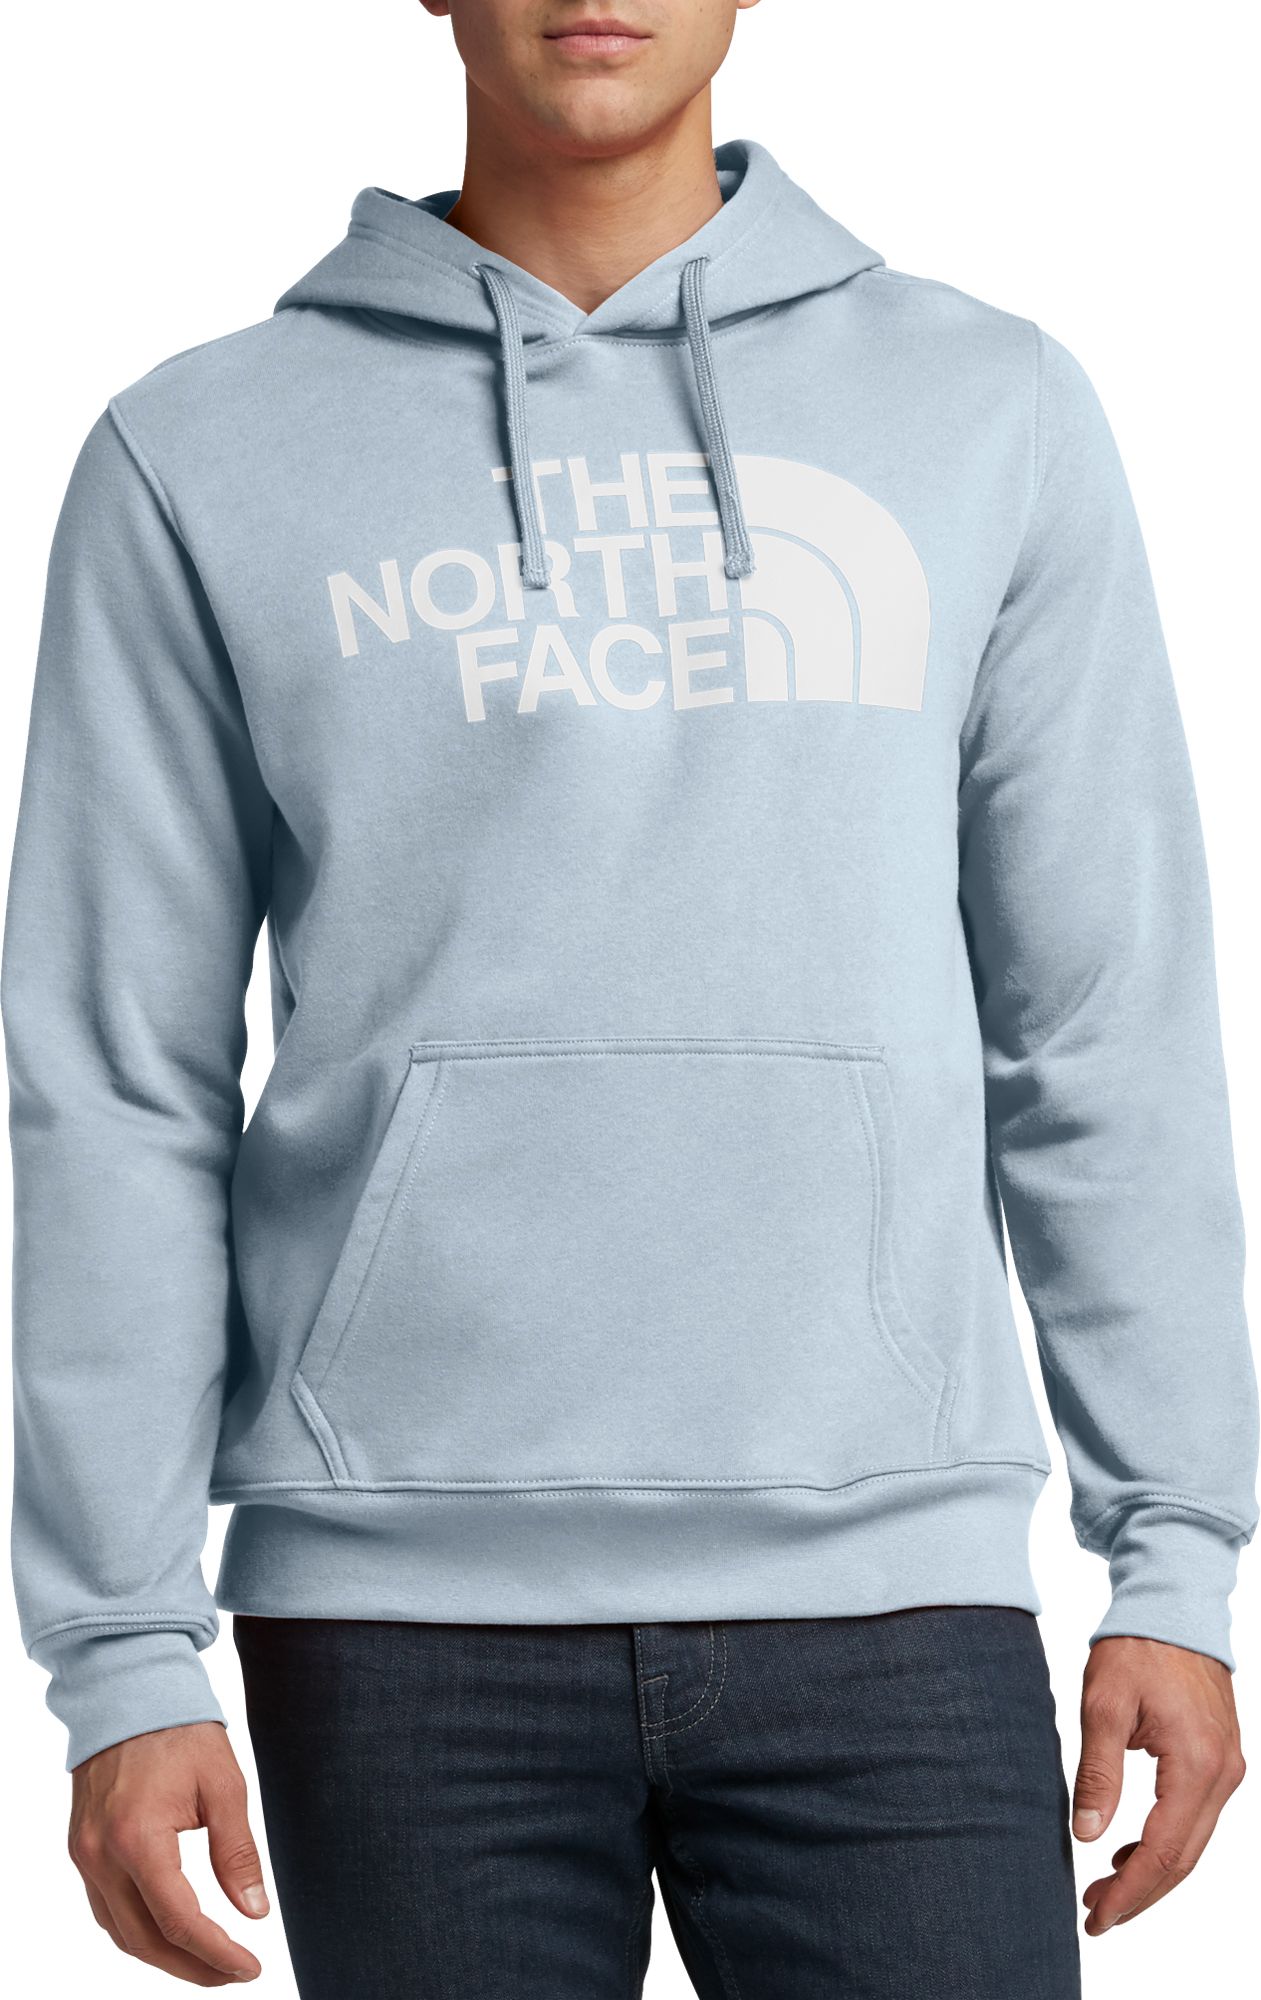 north face light blue hoodie